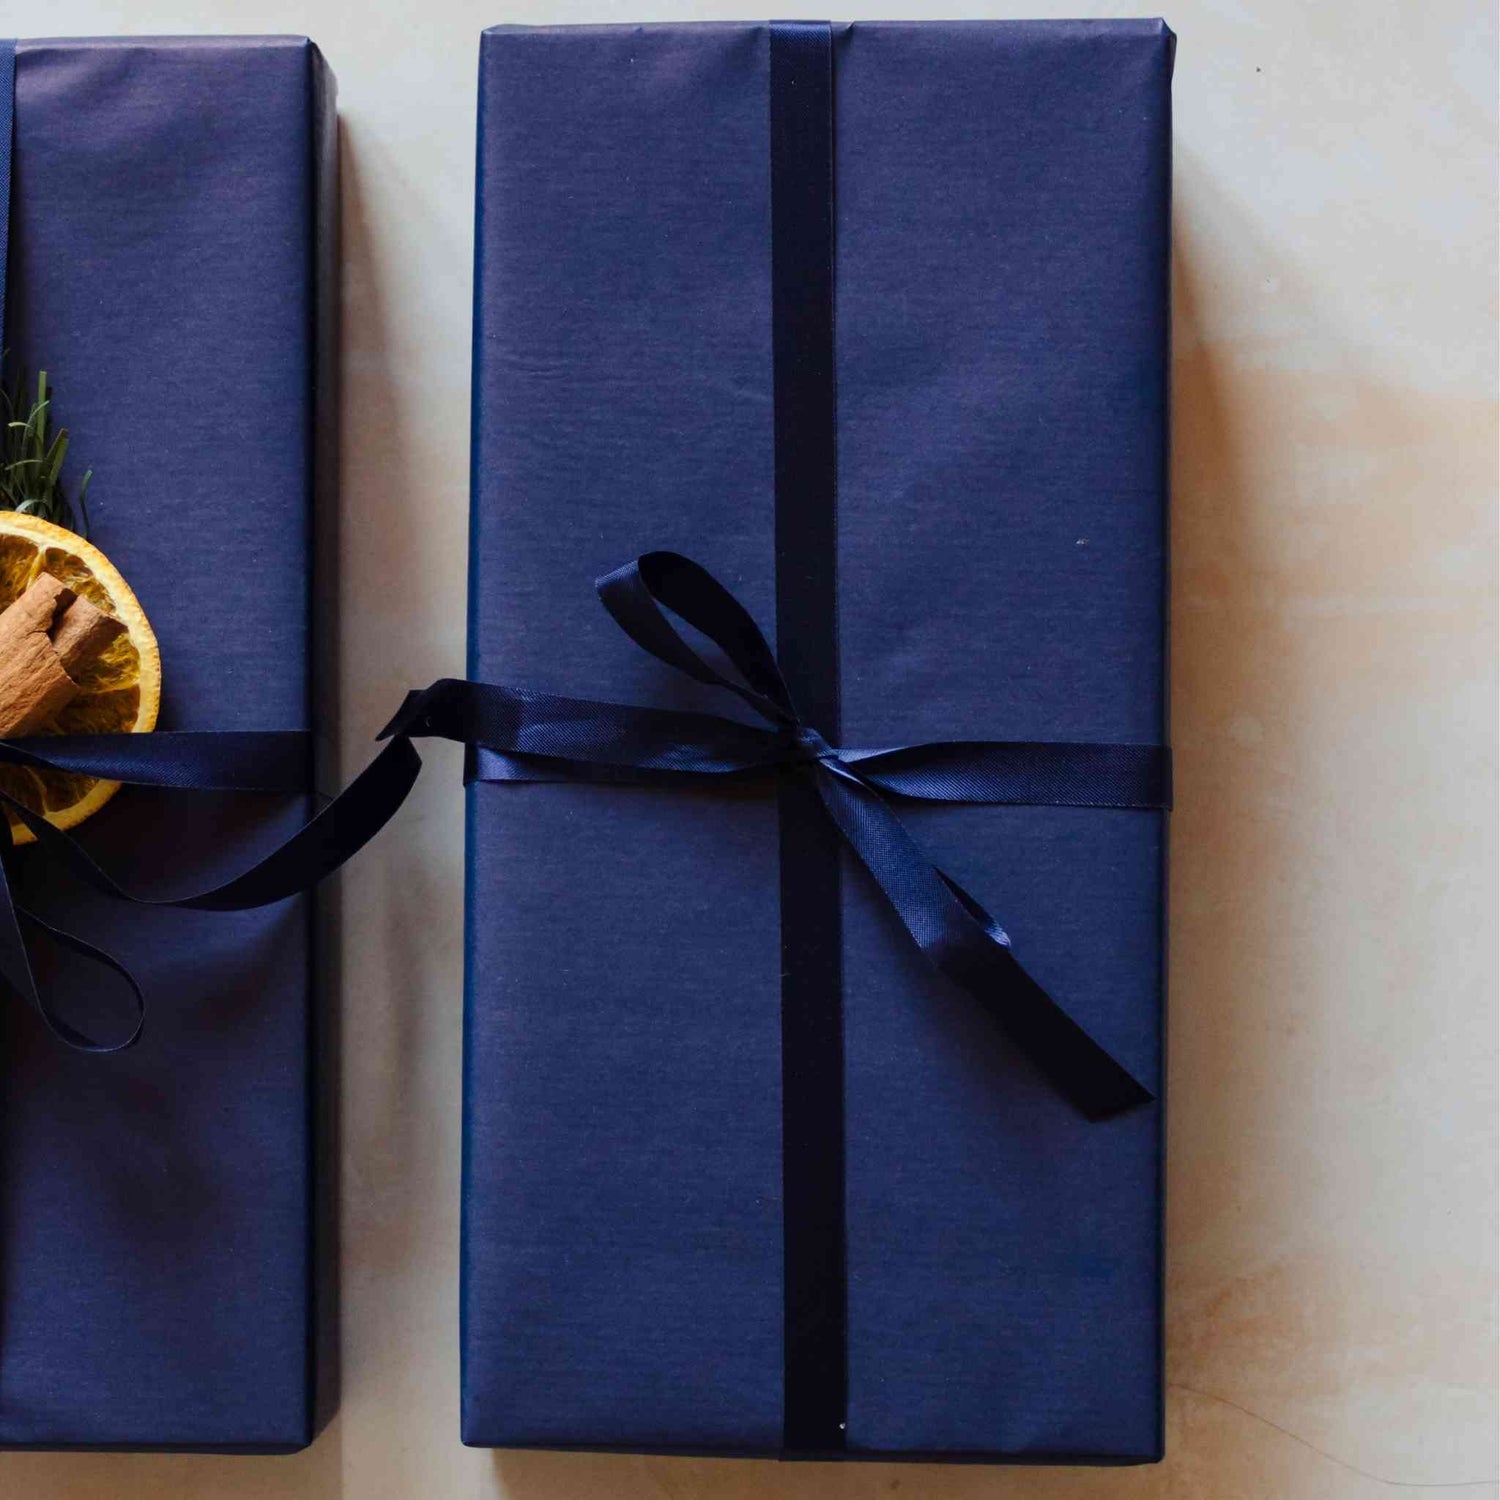 A reed diffuser from the Home County Co. is shown with luxury Gift Wrap. The reed diffuser is wrapped in luxury navy wrapping paper secured with navy ribbon.